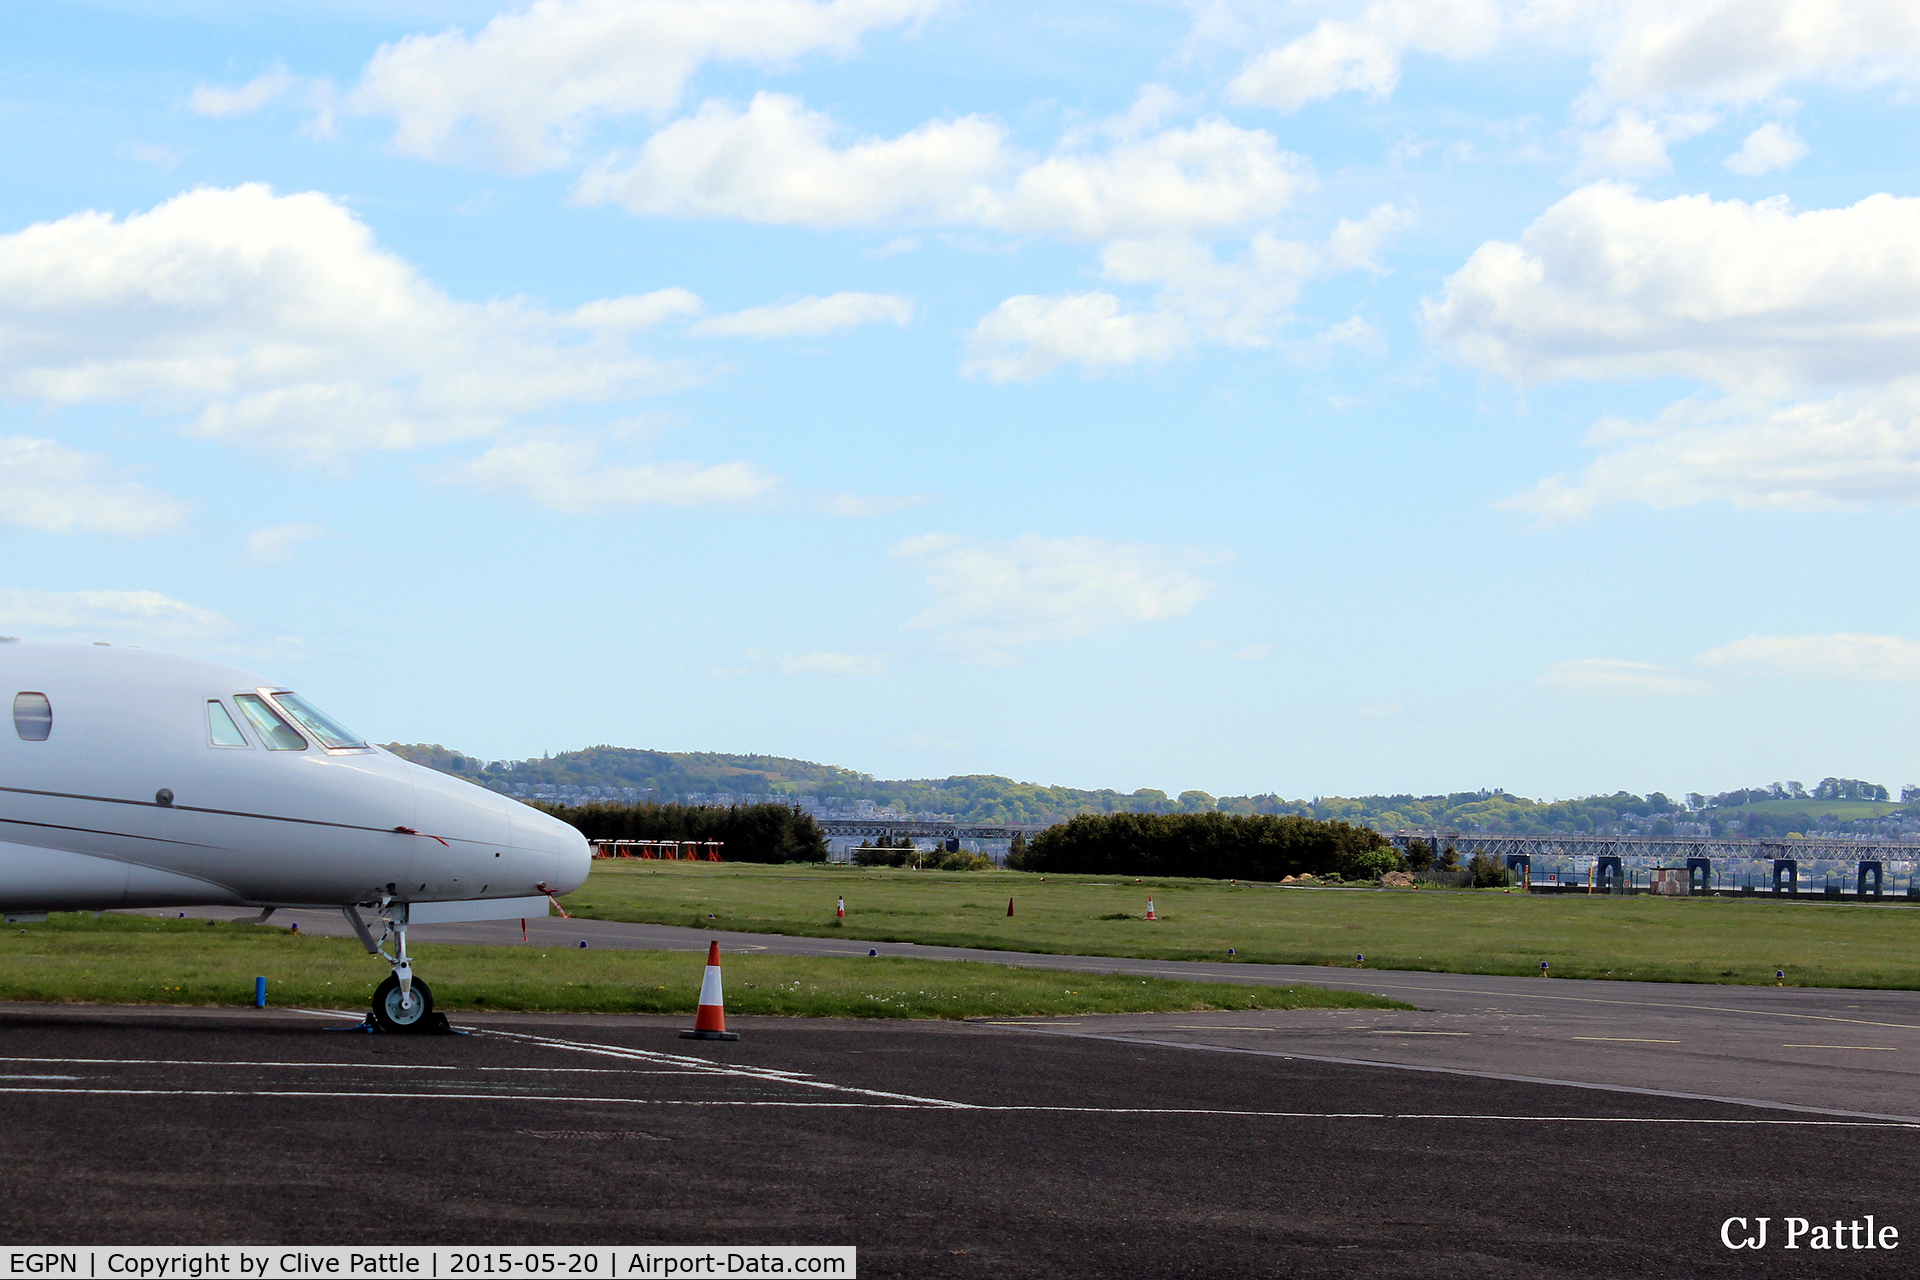 Dundee Airport, Dundee, Scotland United Kingdom (EGPN) - A shot looking southeast across the airfield at Dundee Riverside airport (EGPN). Located on the north bank of the River Tay, the Tay Rail Bridge is visible in the background.